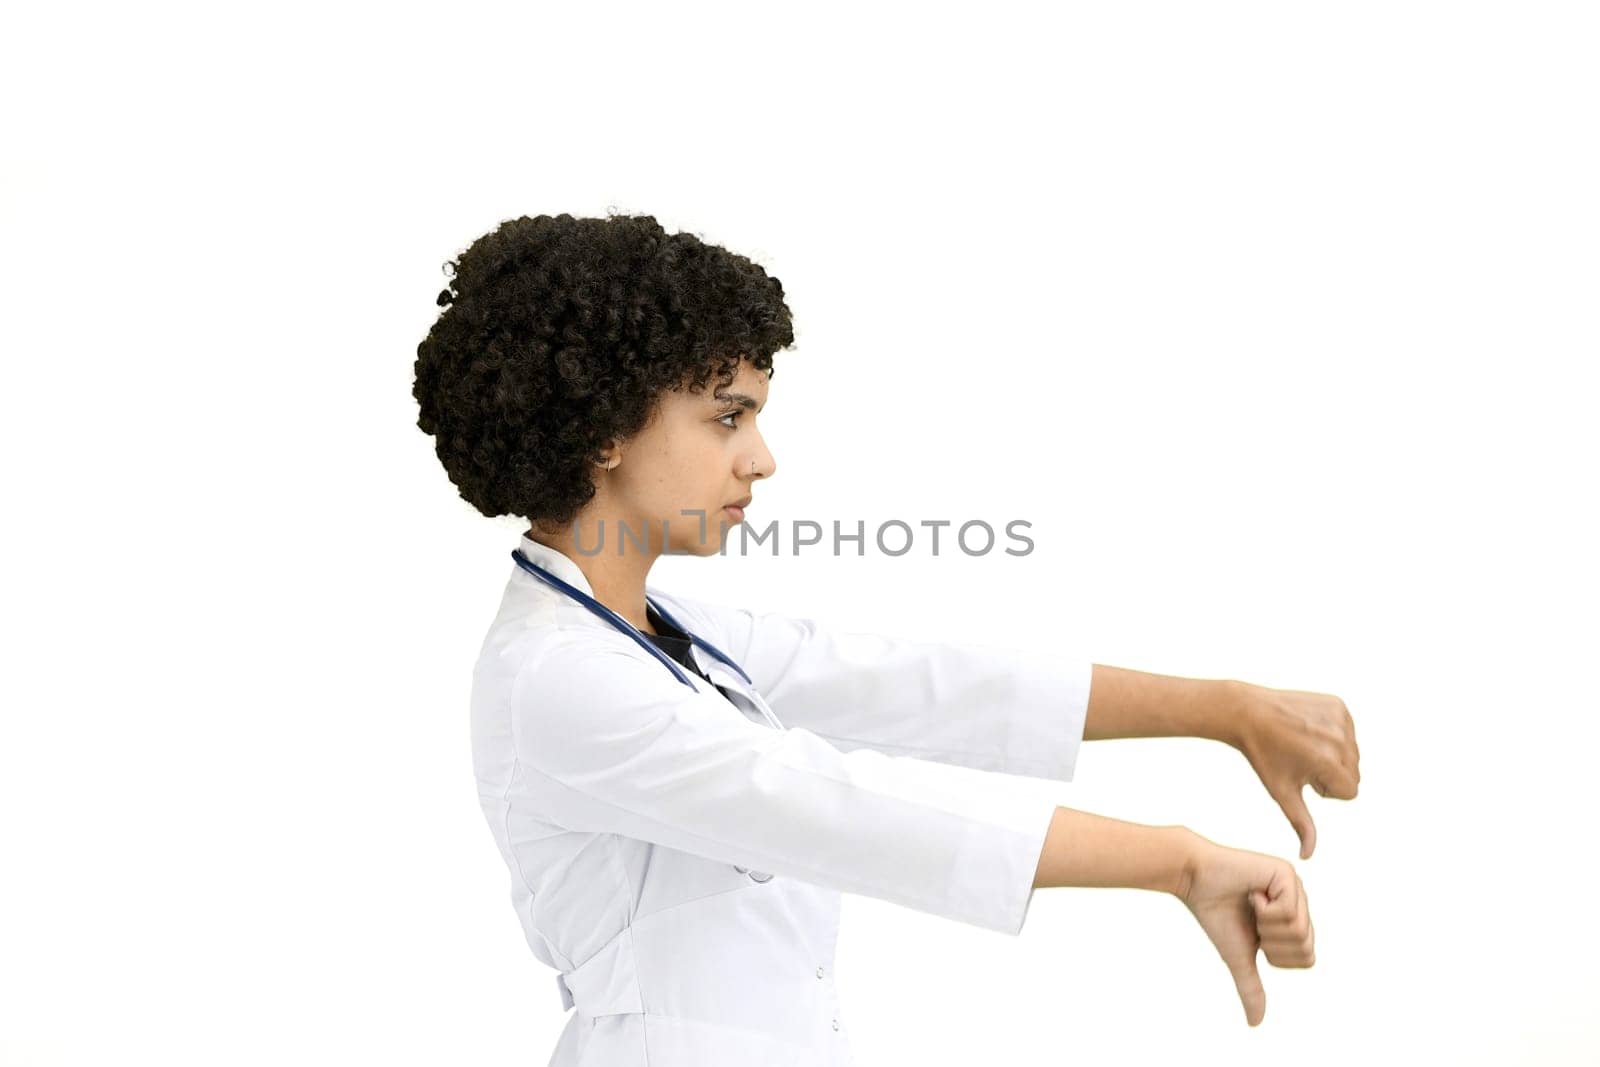 Female doctor, close-up, on a white background, shows thumbs down.